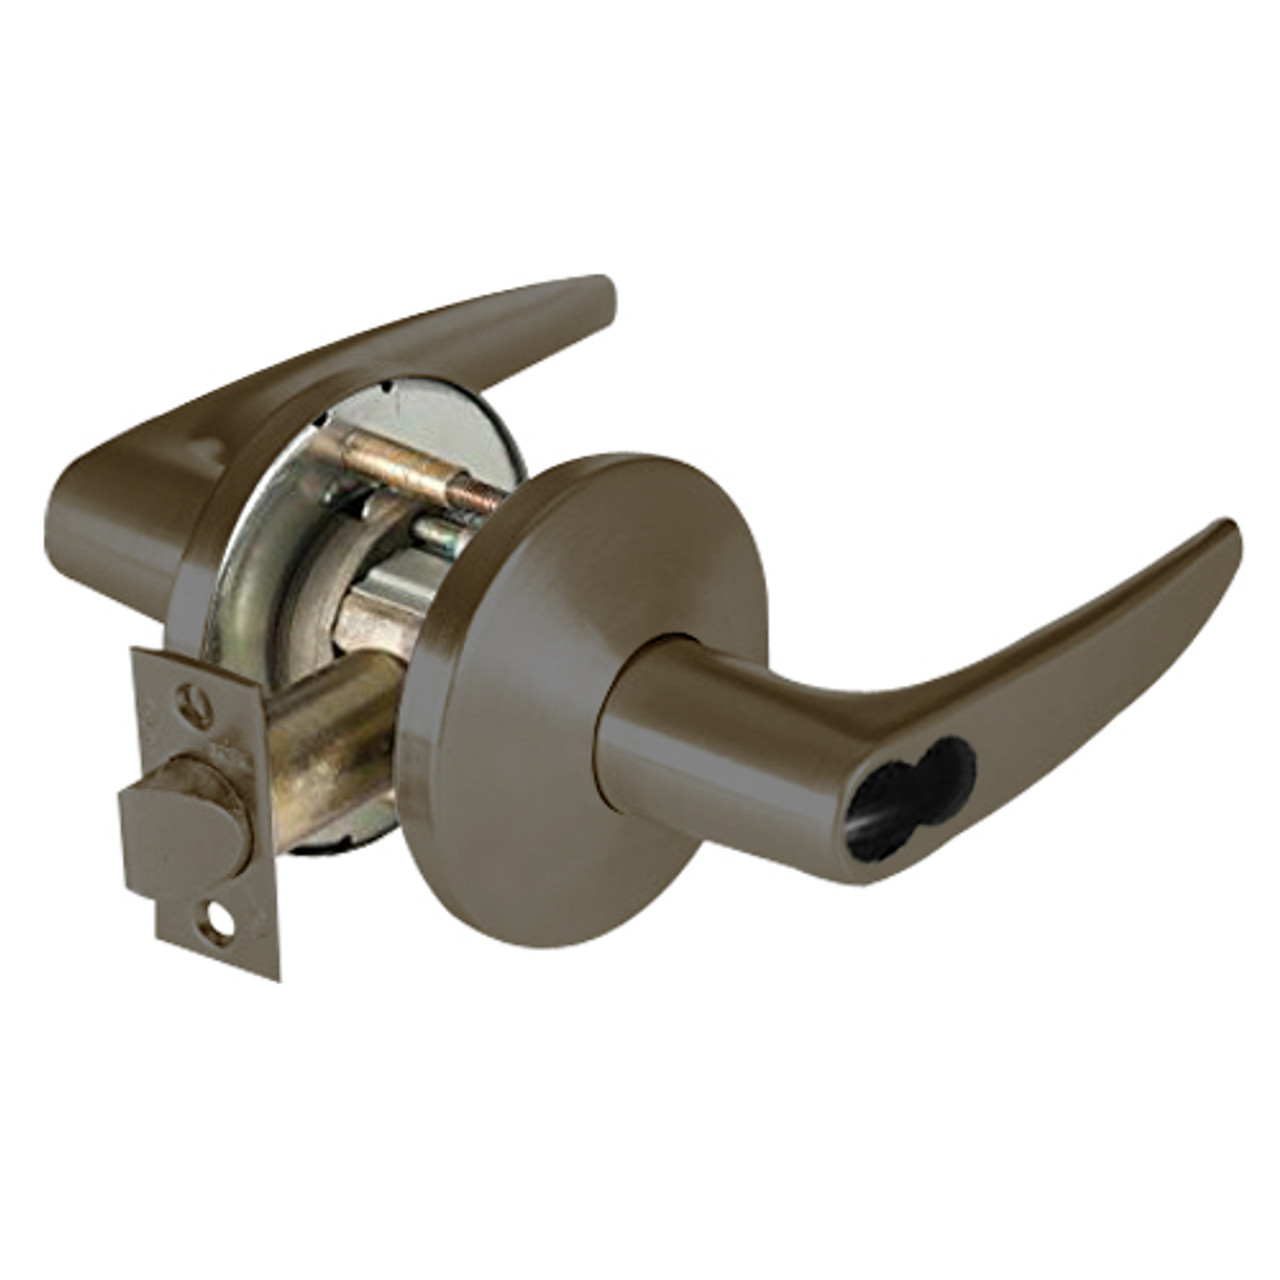 9K37YR16LS3613LM Best 9K Series Special Function Cylindrical Lever Locks with Curved without Return Lever Design Accept 7 Pin Best Core in Oil Rubbed Bronze